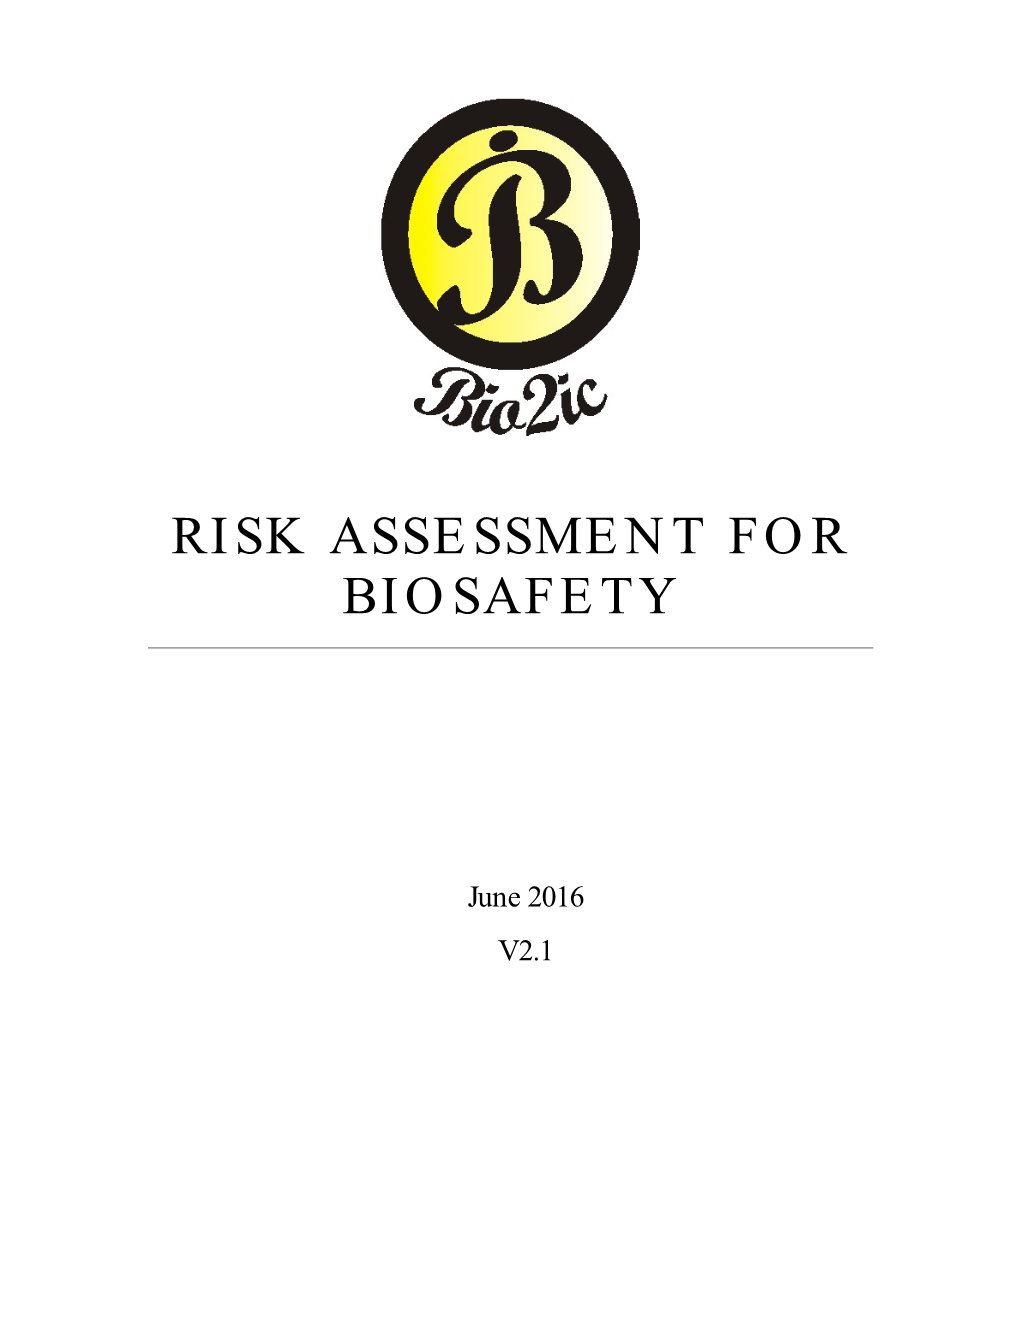 Risk Assessment for Biosafety